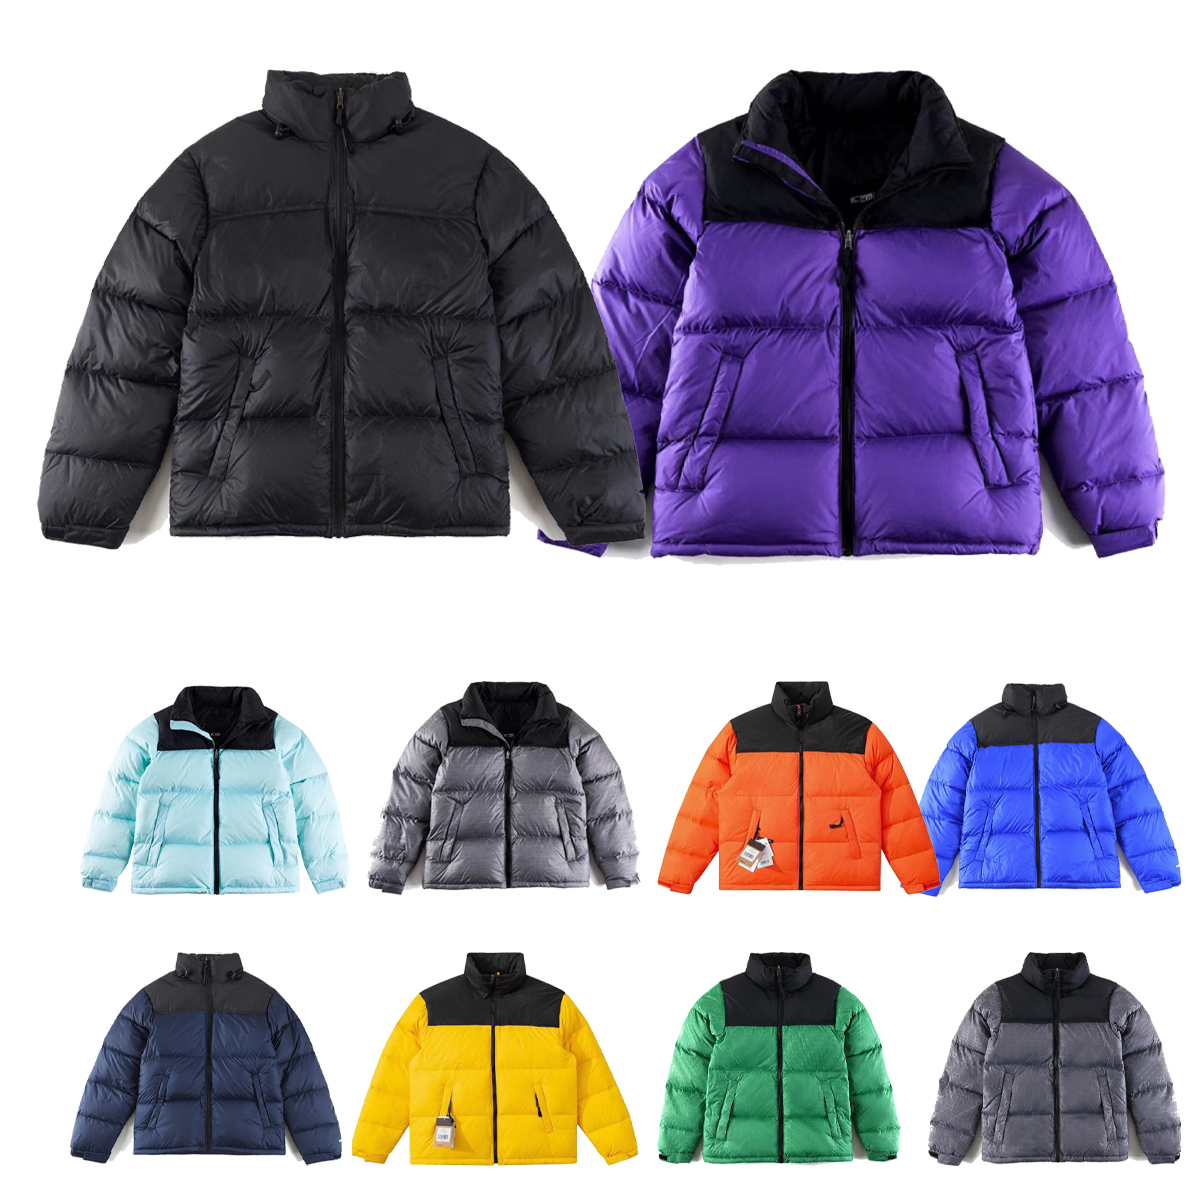 

Men's tnf puffer jacket coat down jackets co-branded design fashion north parker winter women's outdoor casual warm and fluffy clothes for couplesstreet size m to xxl